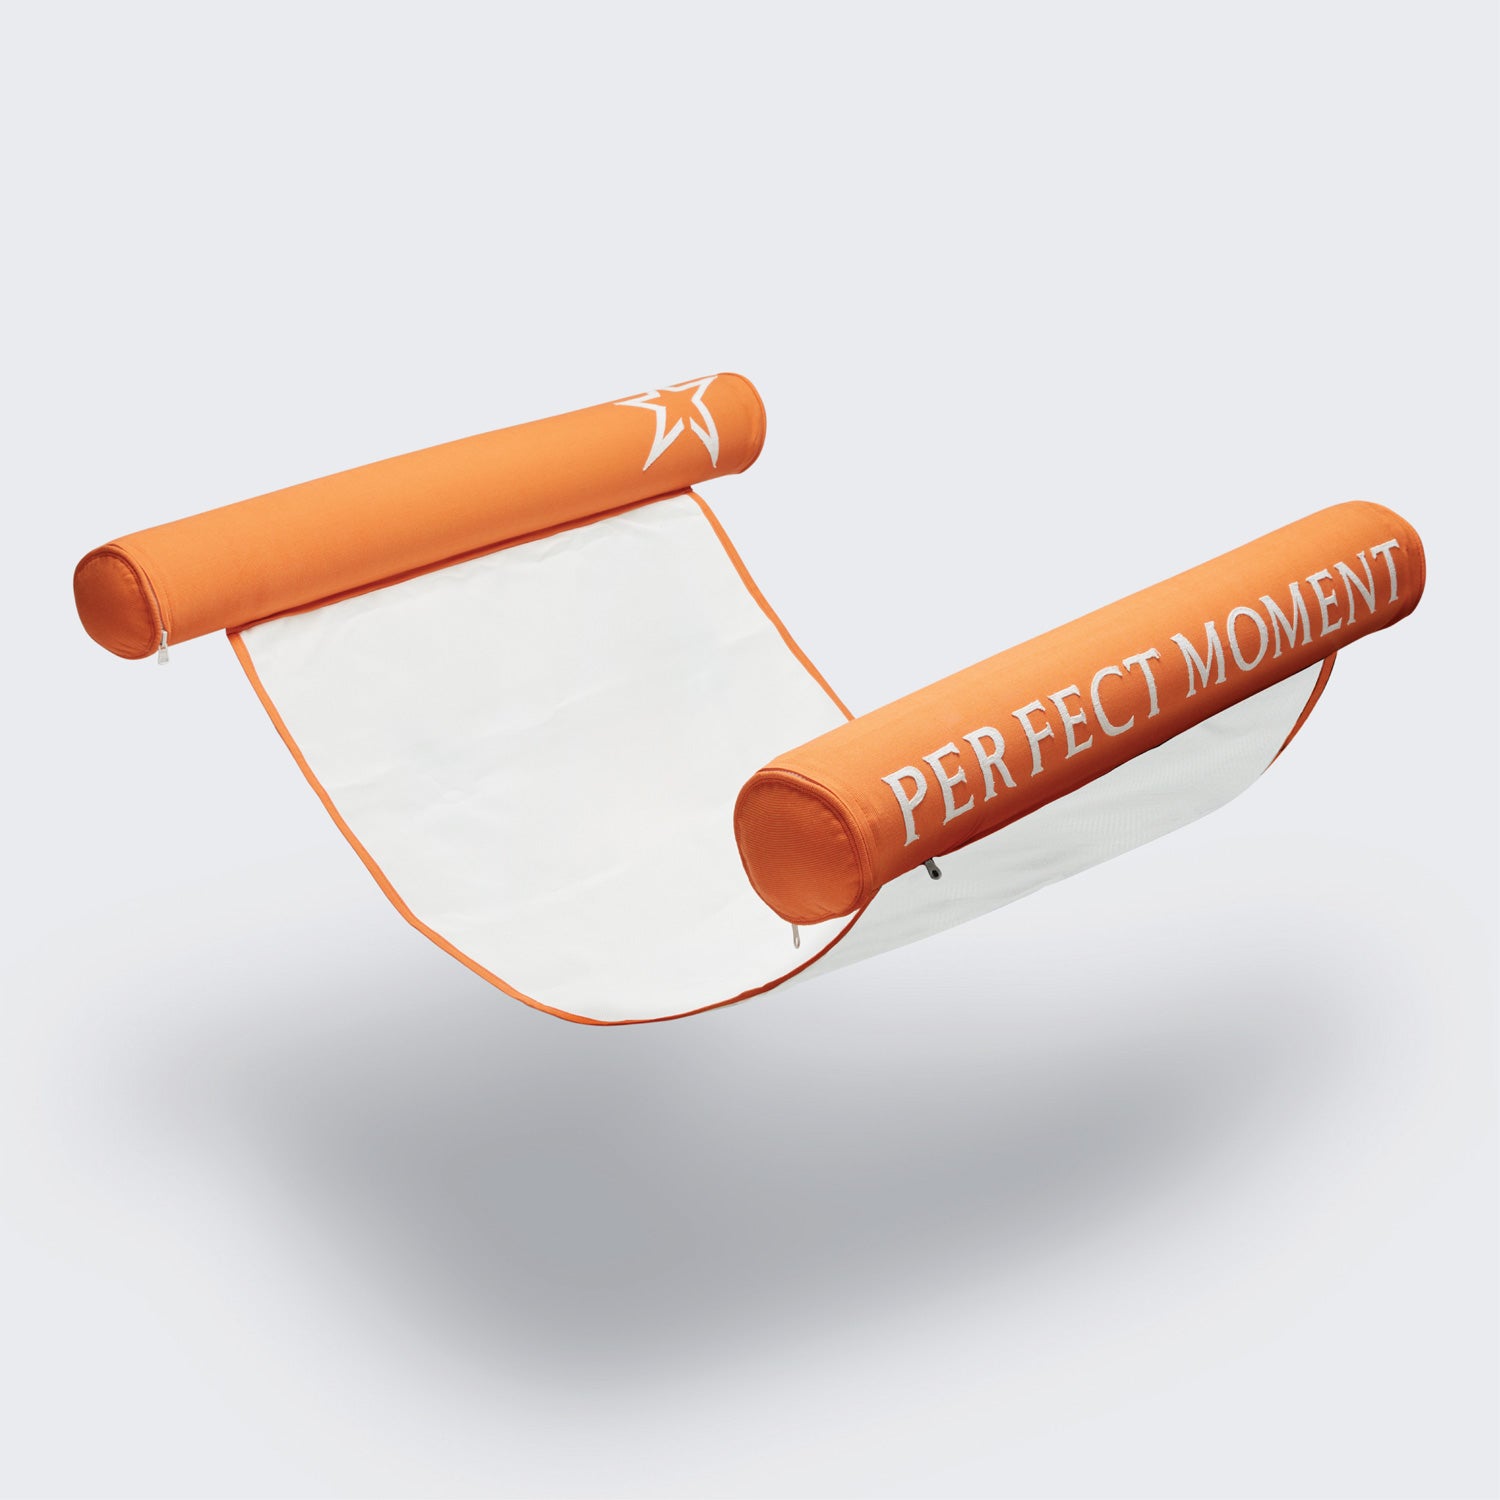 Deep-etched of an orange luxury pool float hammock on white background.